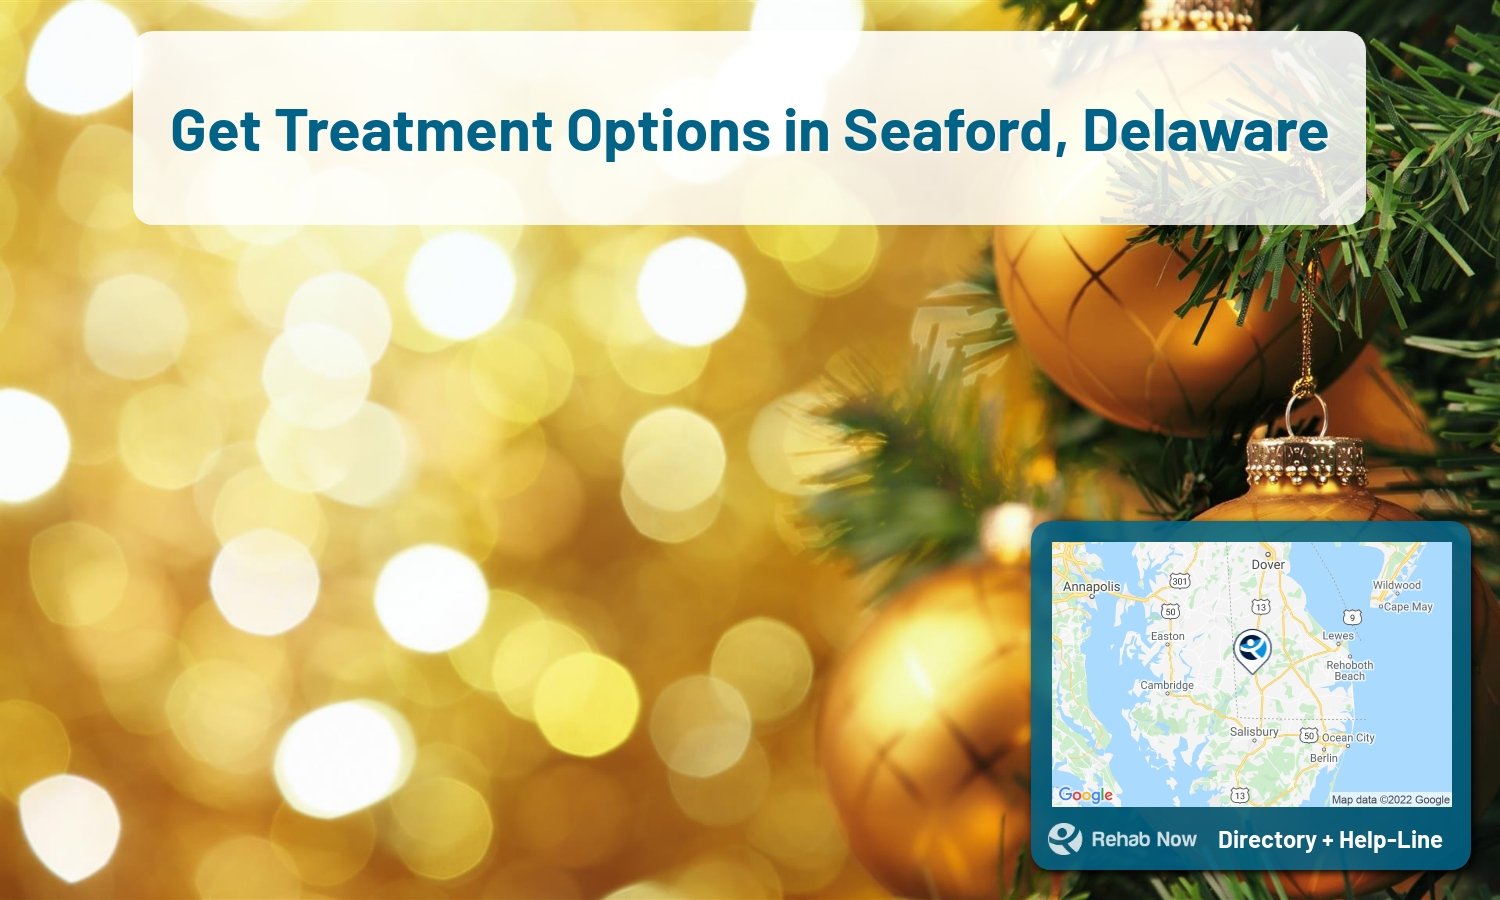 List of alcohol and drug treatment centers near you in Seaford, Delaware. Research certifications, programs, methods, pricing, and more.